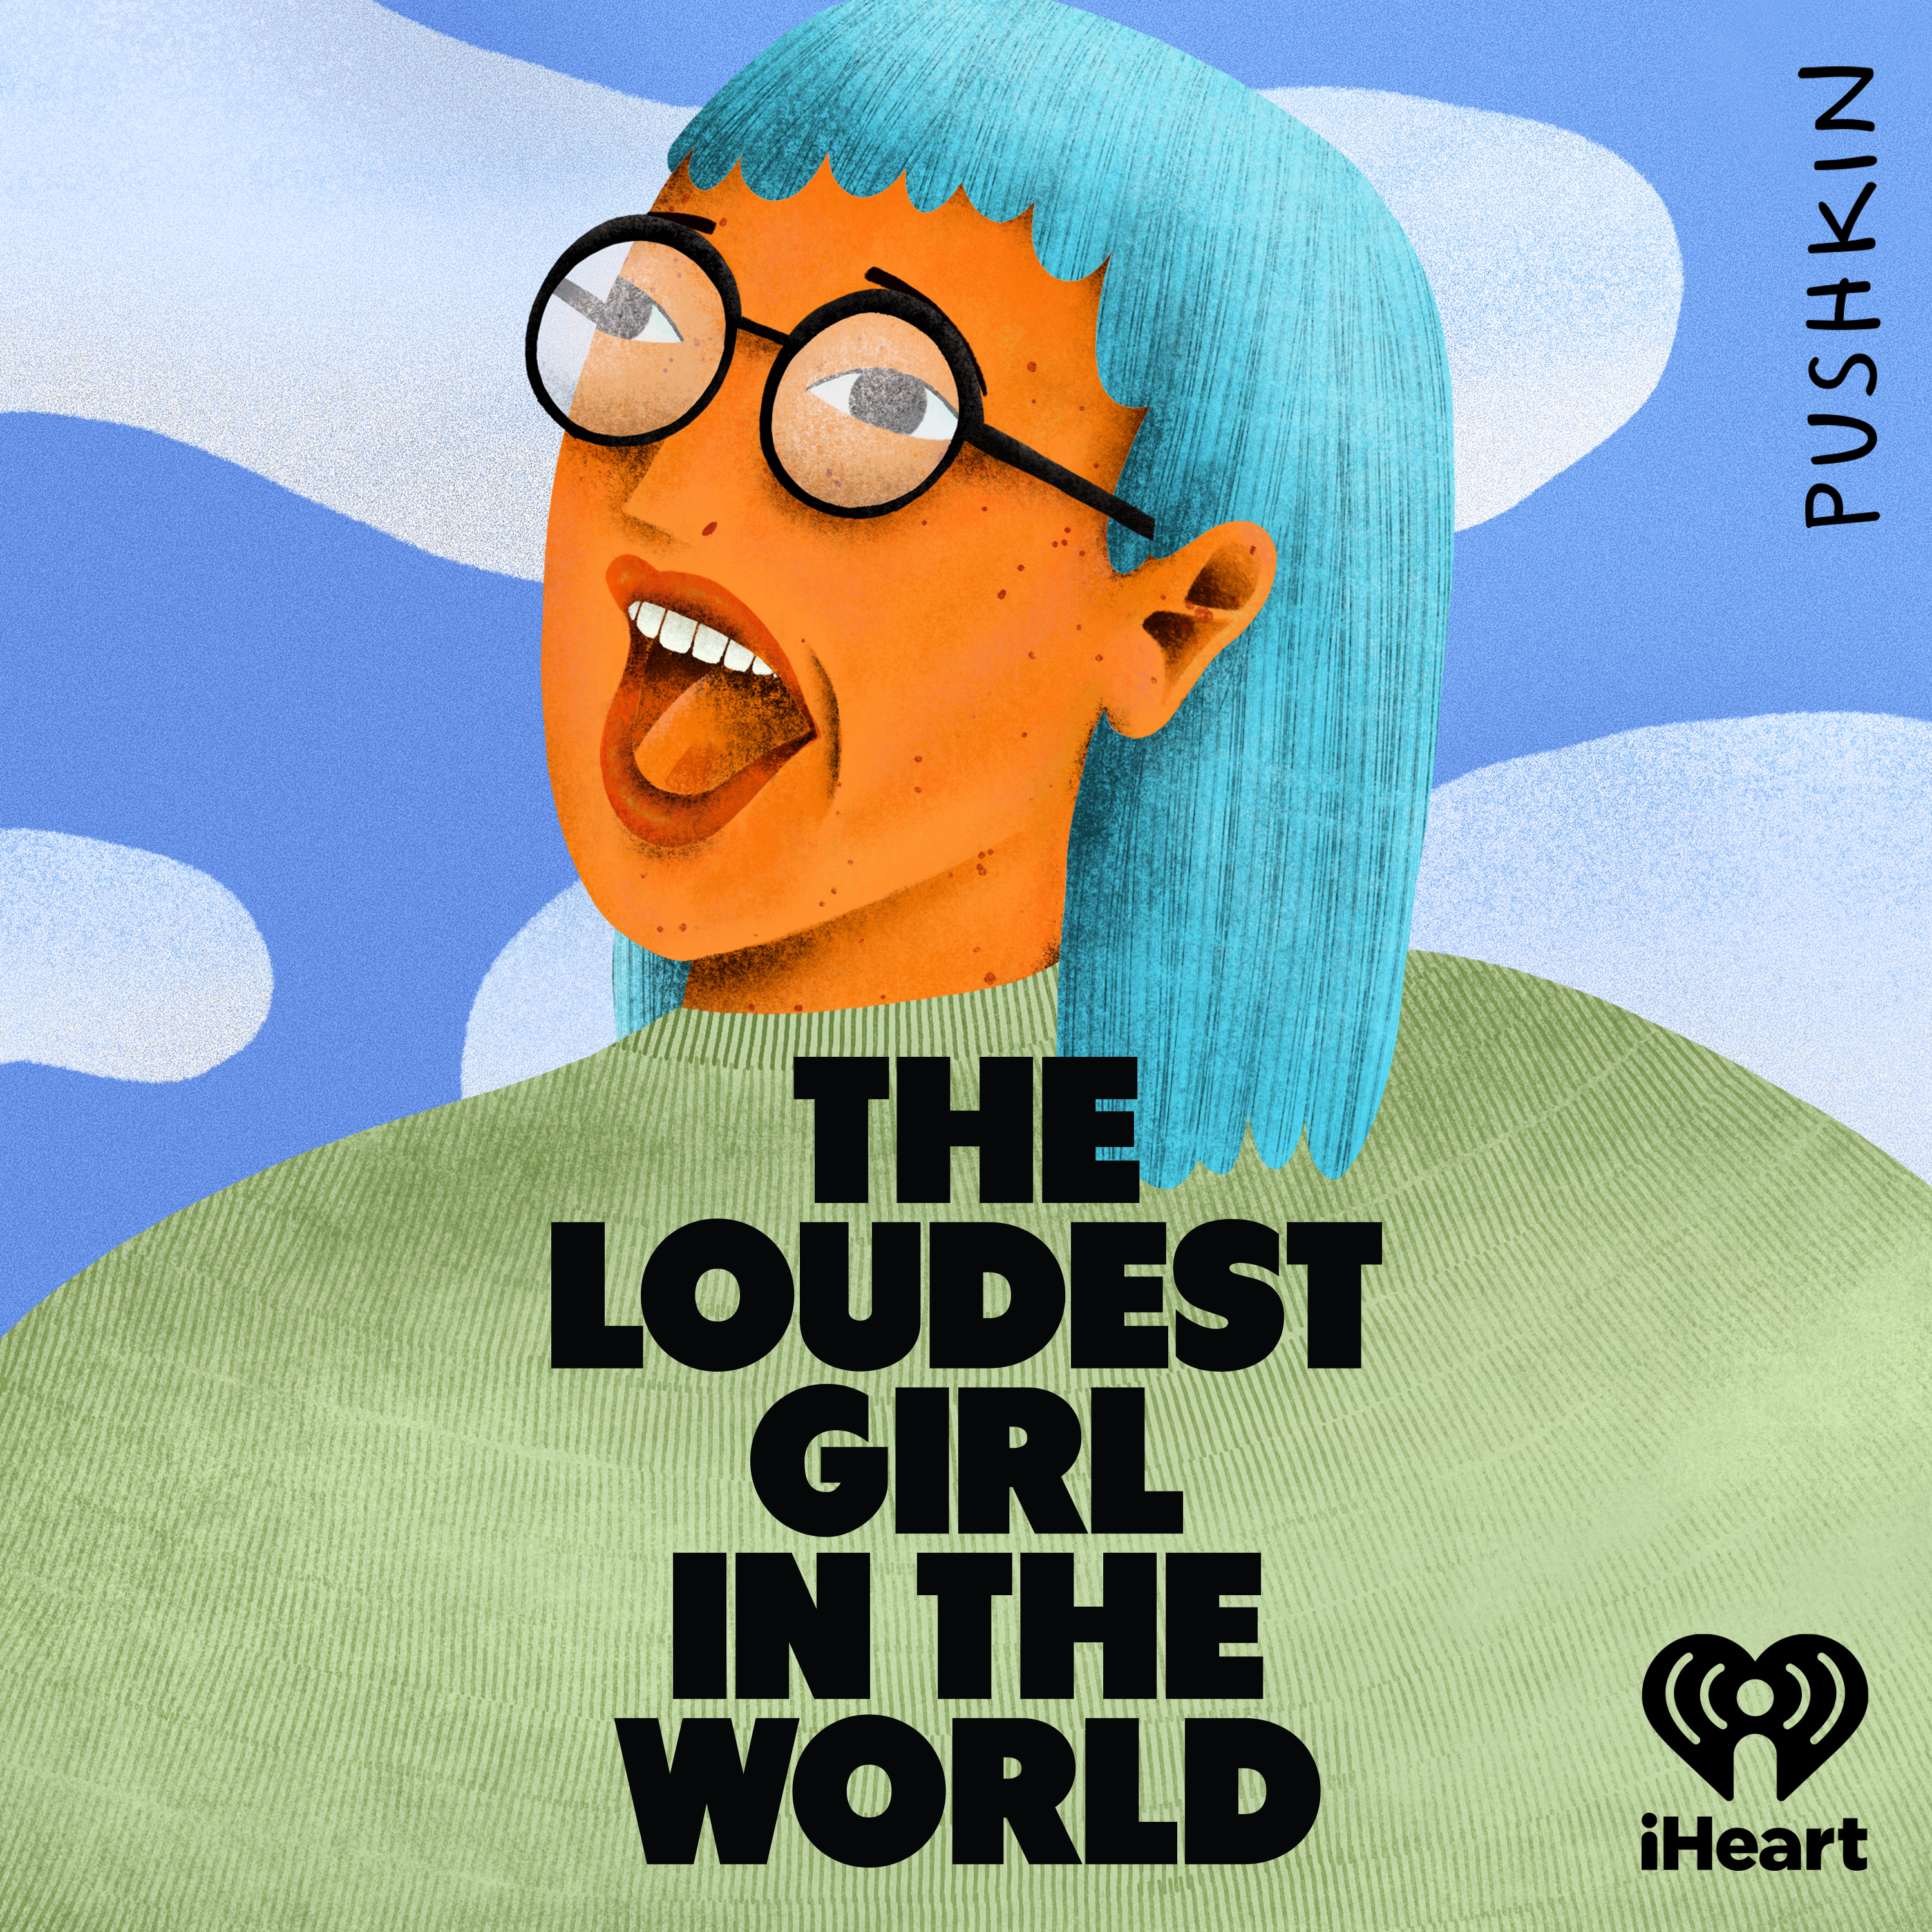 Introducing: The Loudest Girl in the World